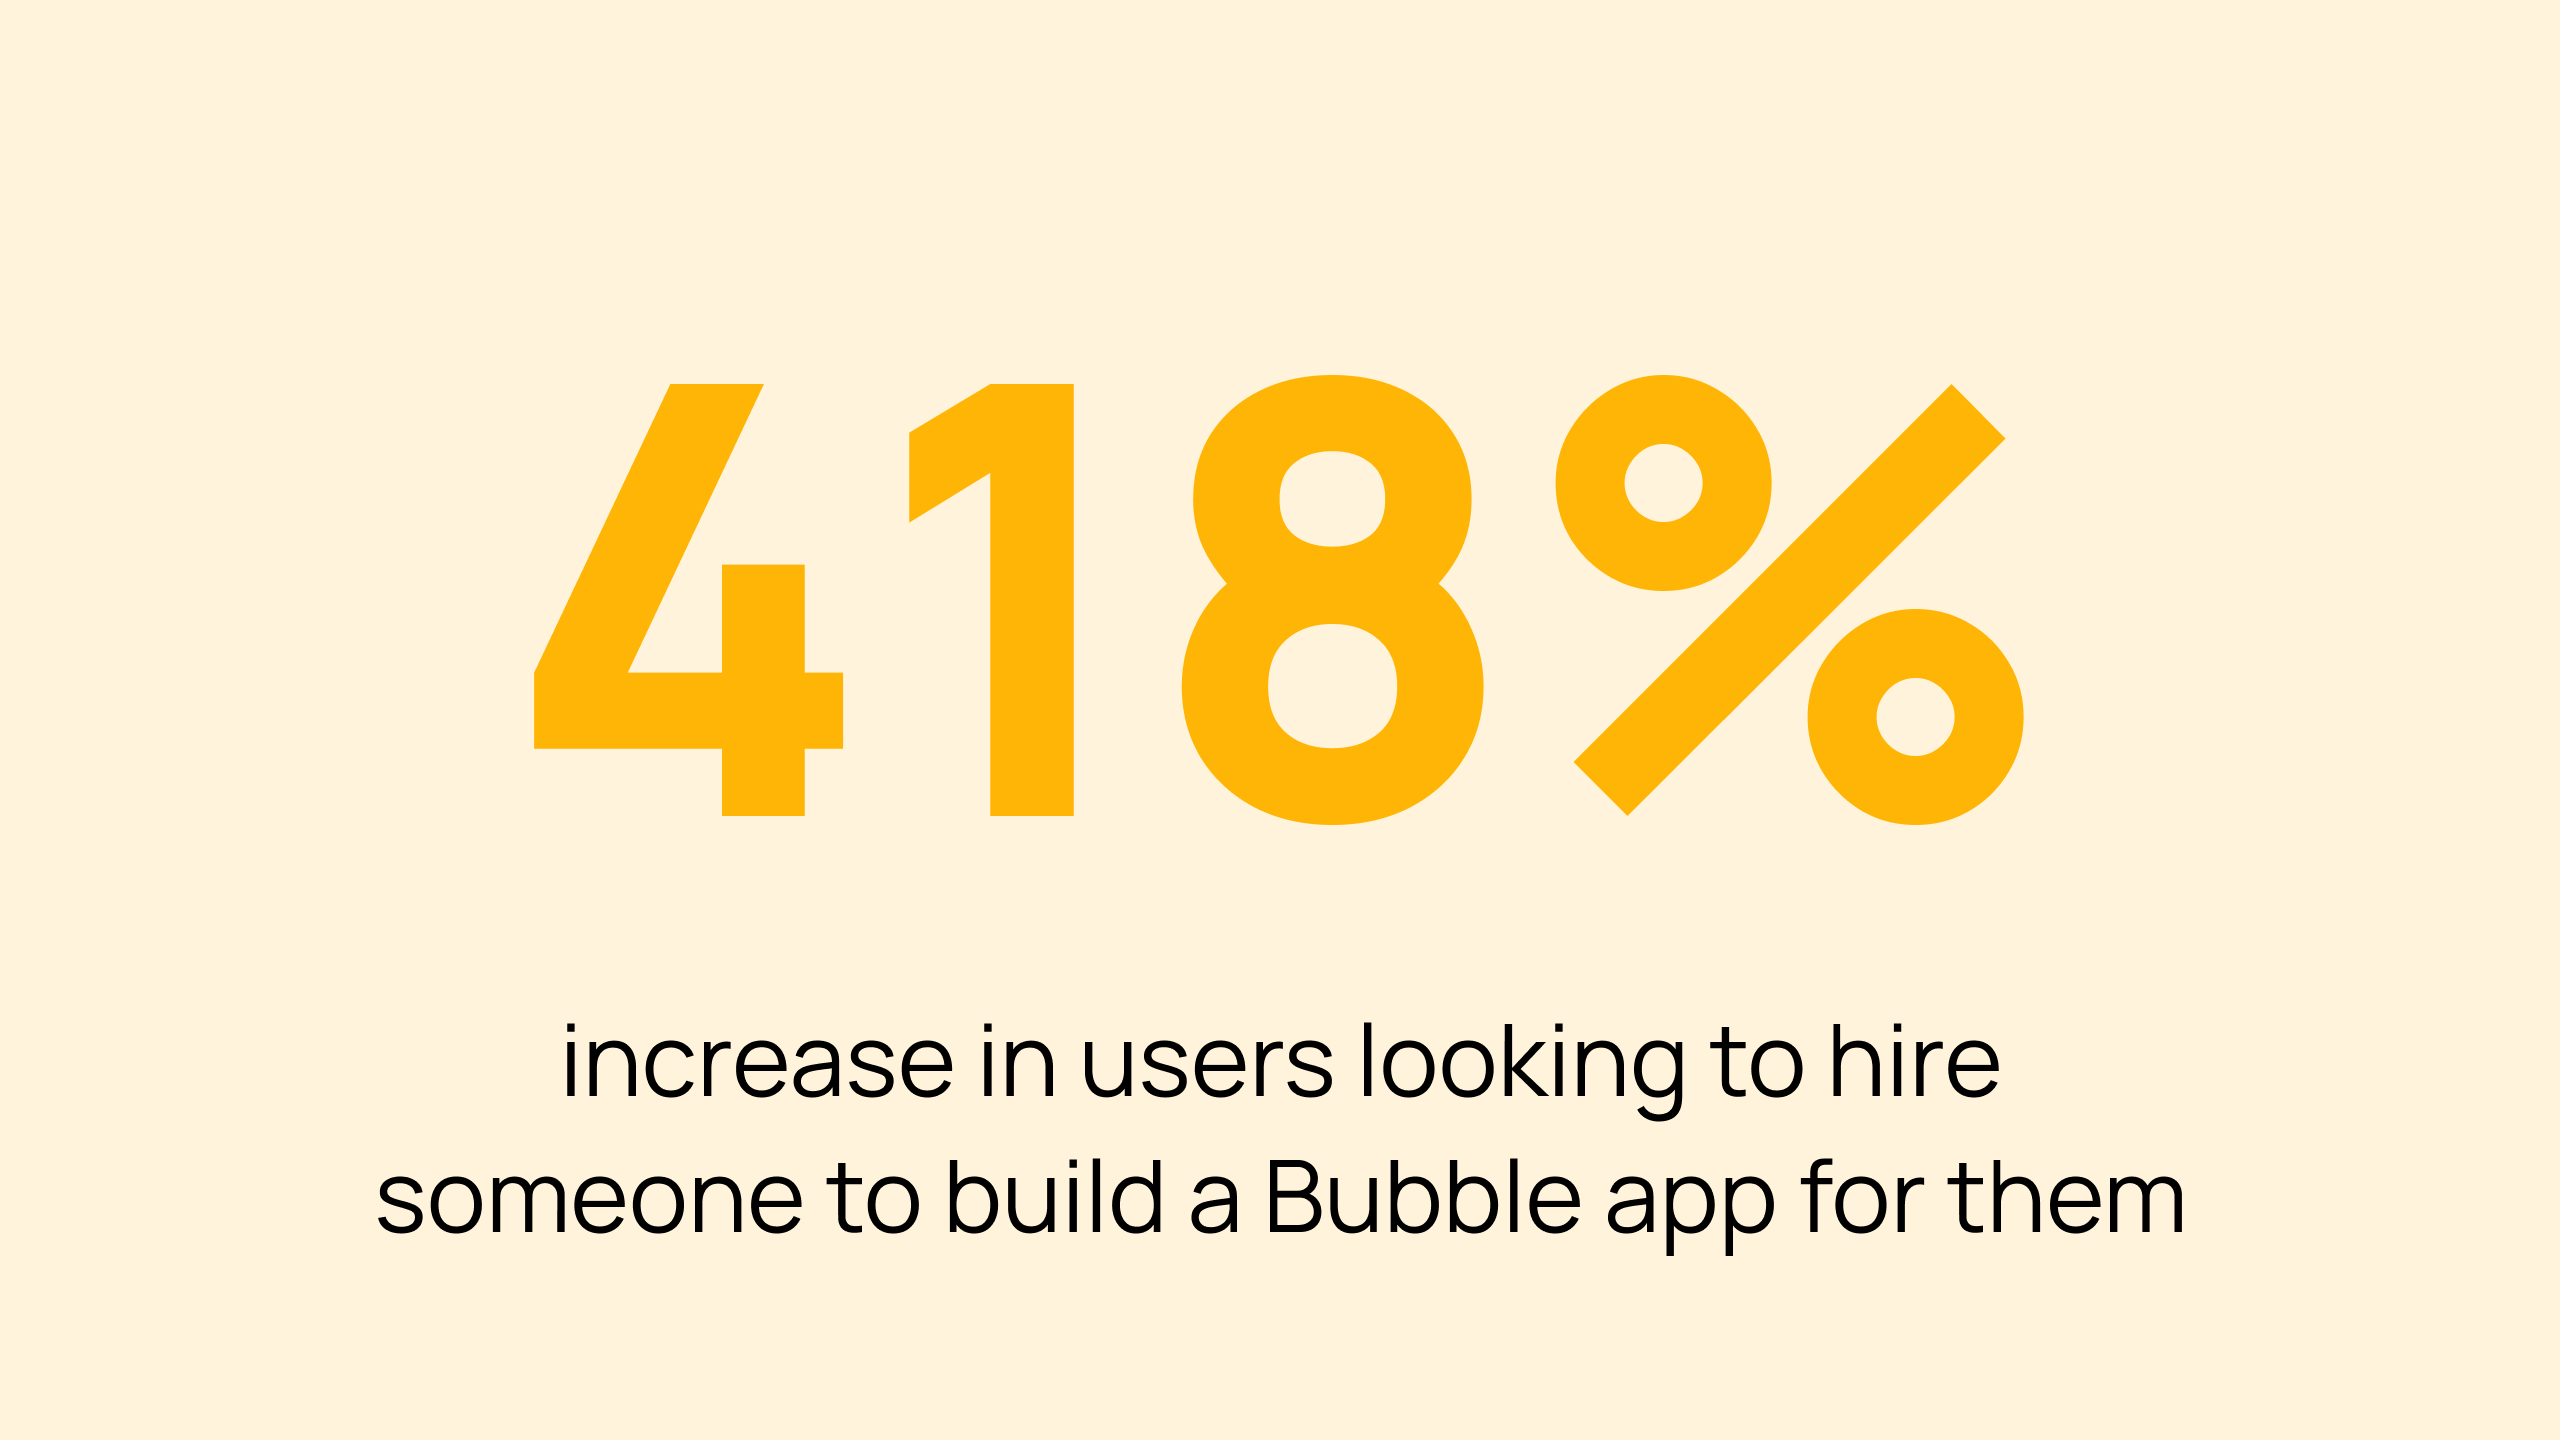 "418% increase in users looking to hire someone to build a Bubble app for them." 418% is much larger in yellow font.